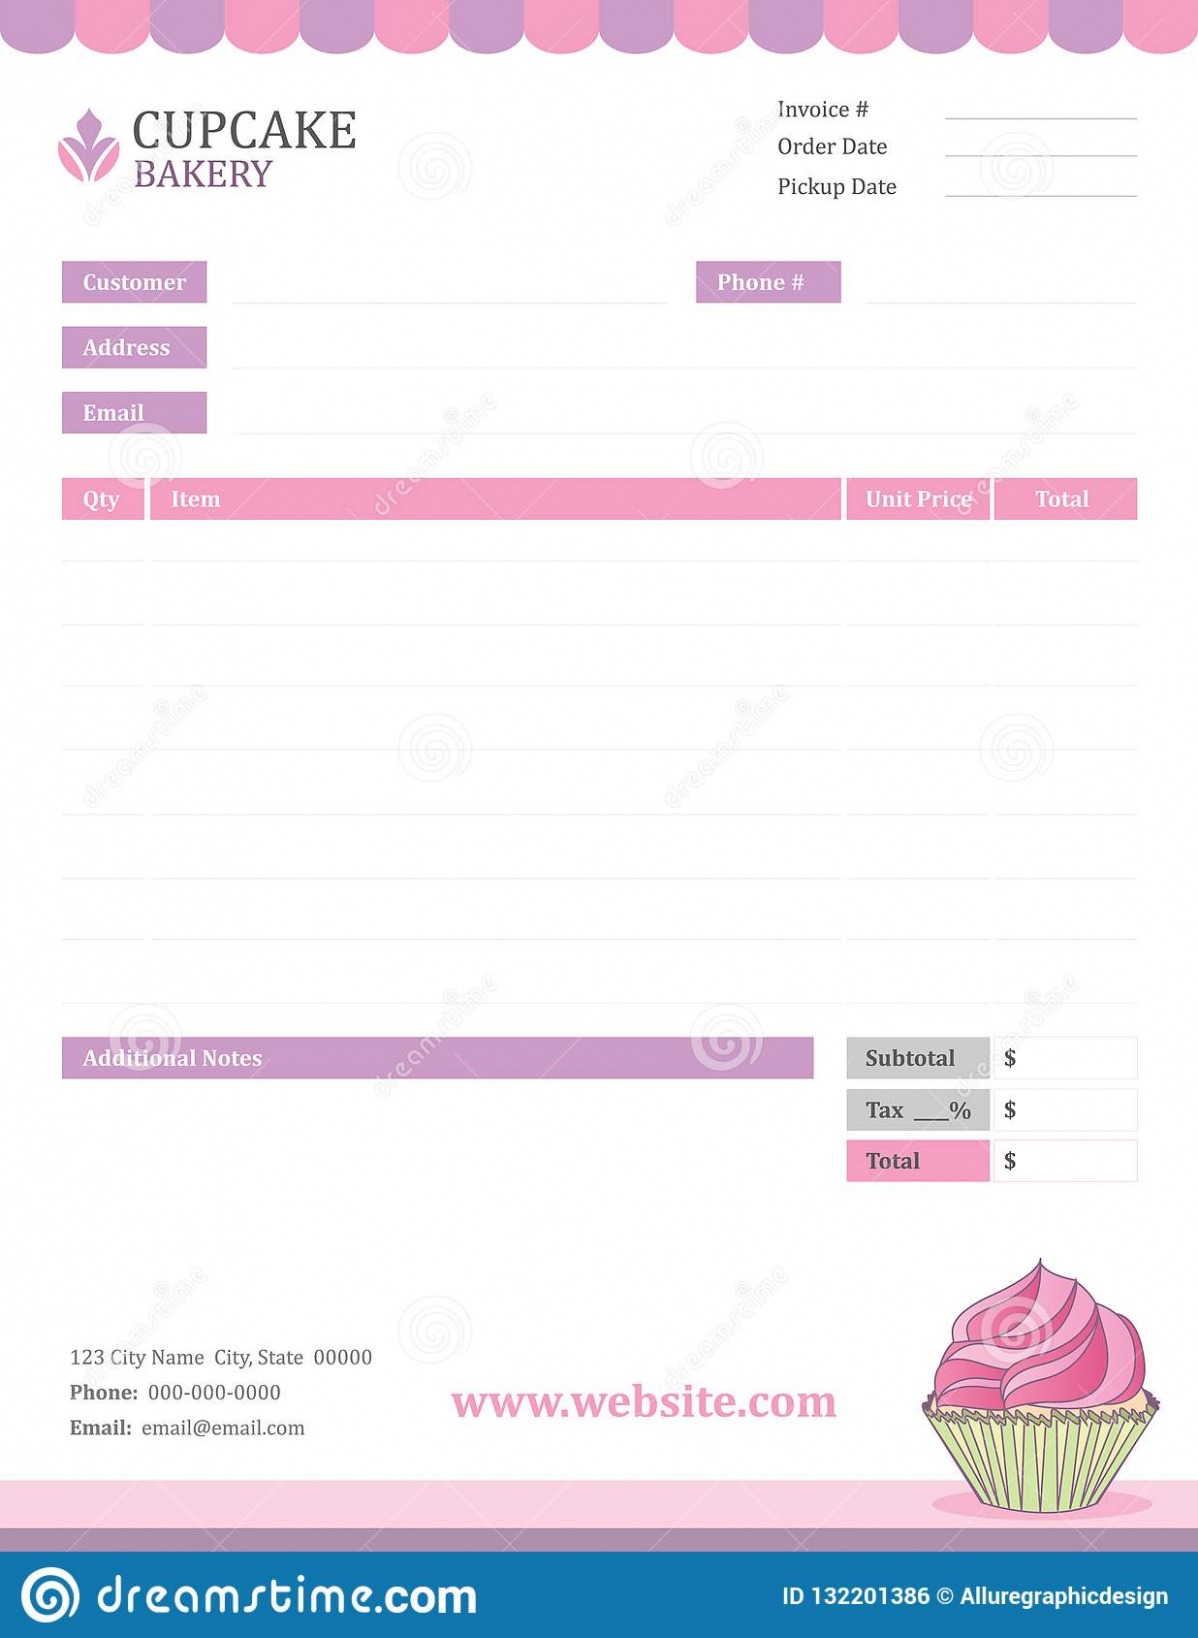 Editable Cupcake Invoice Template Excel